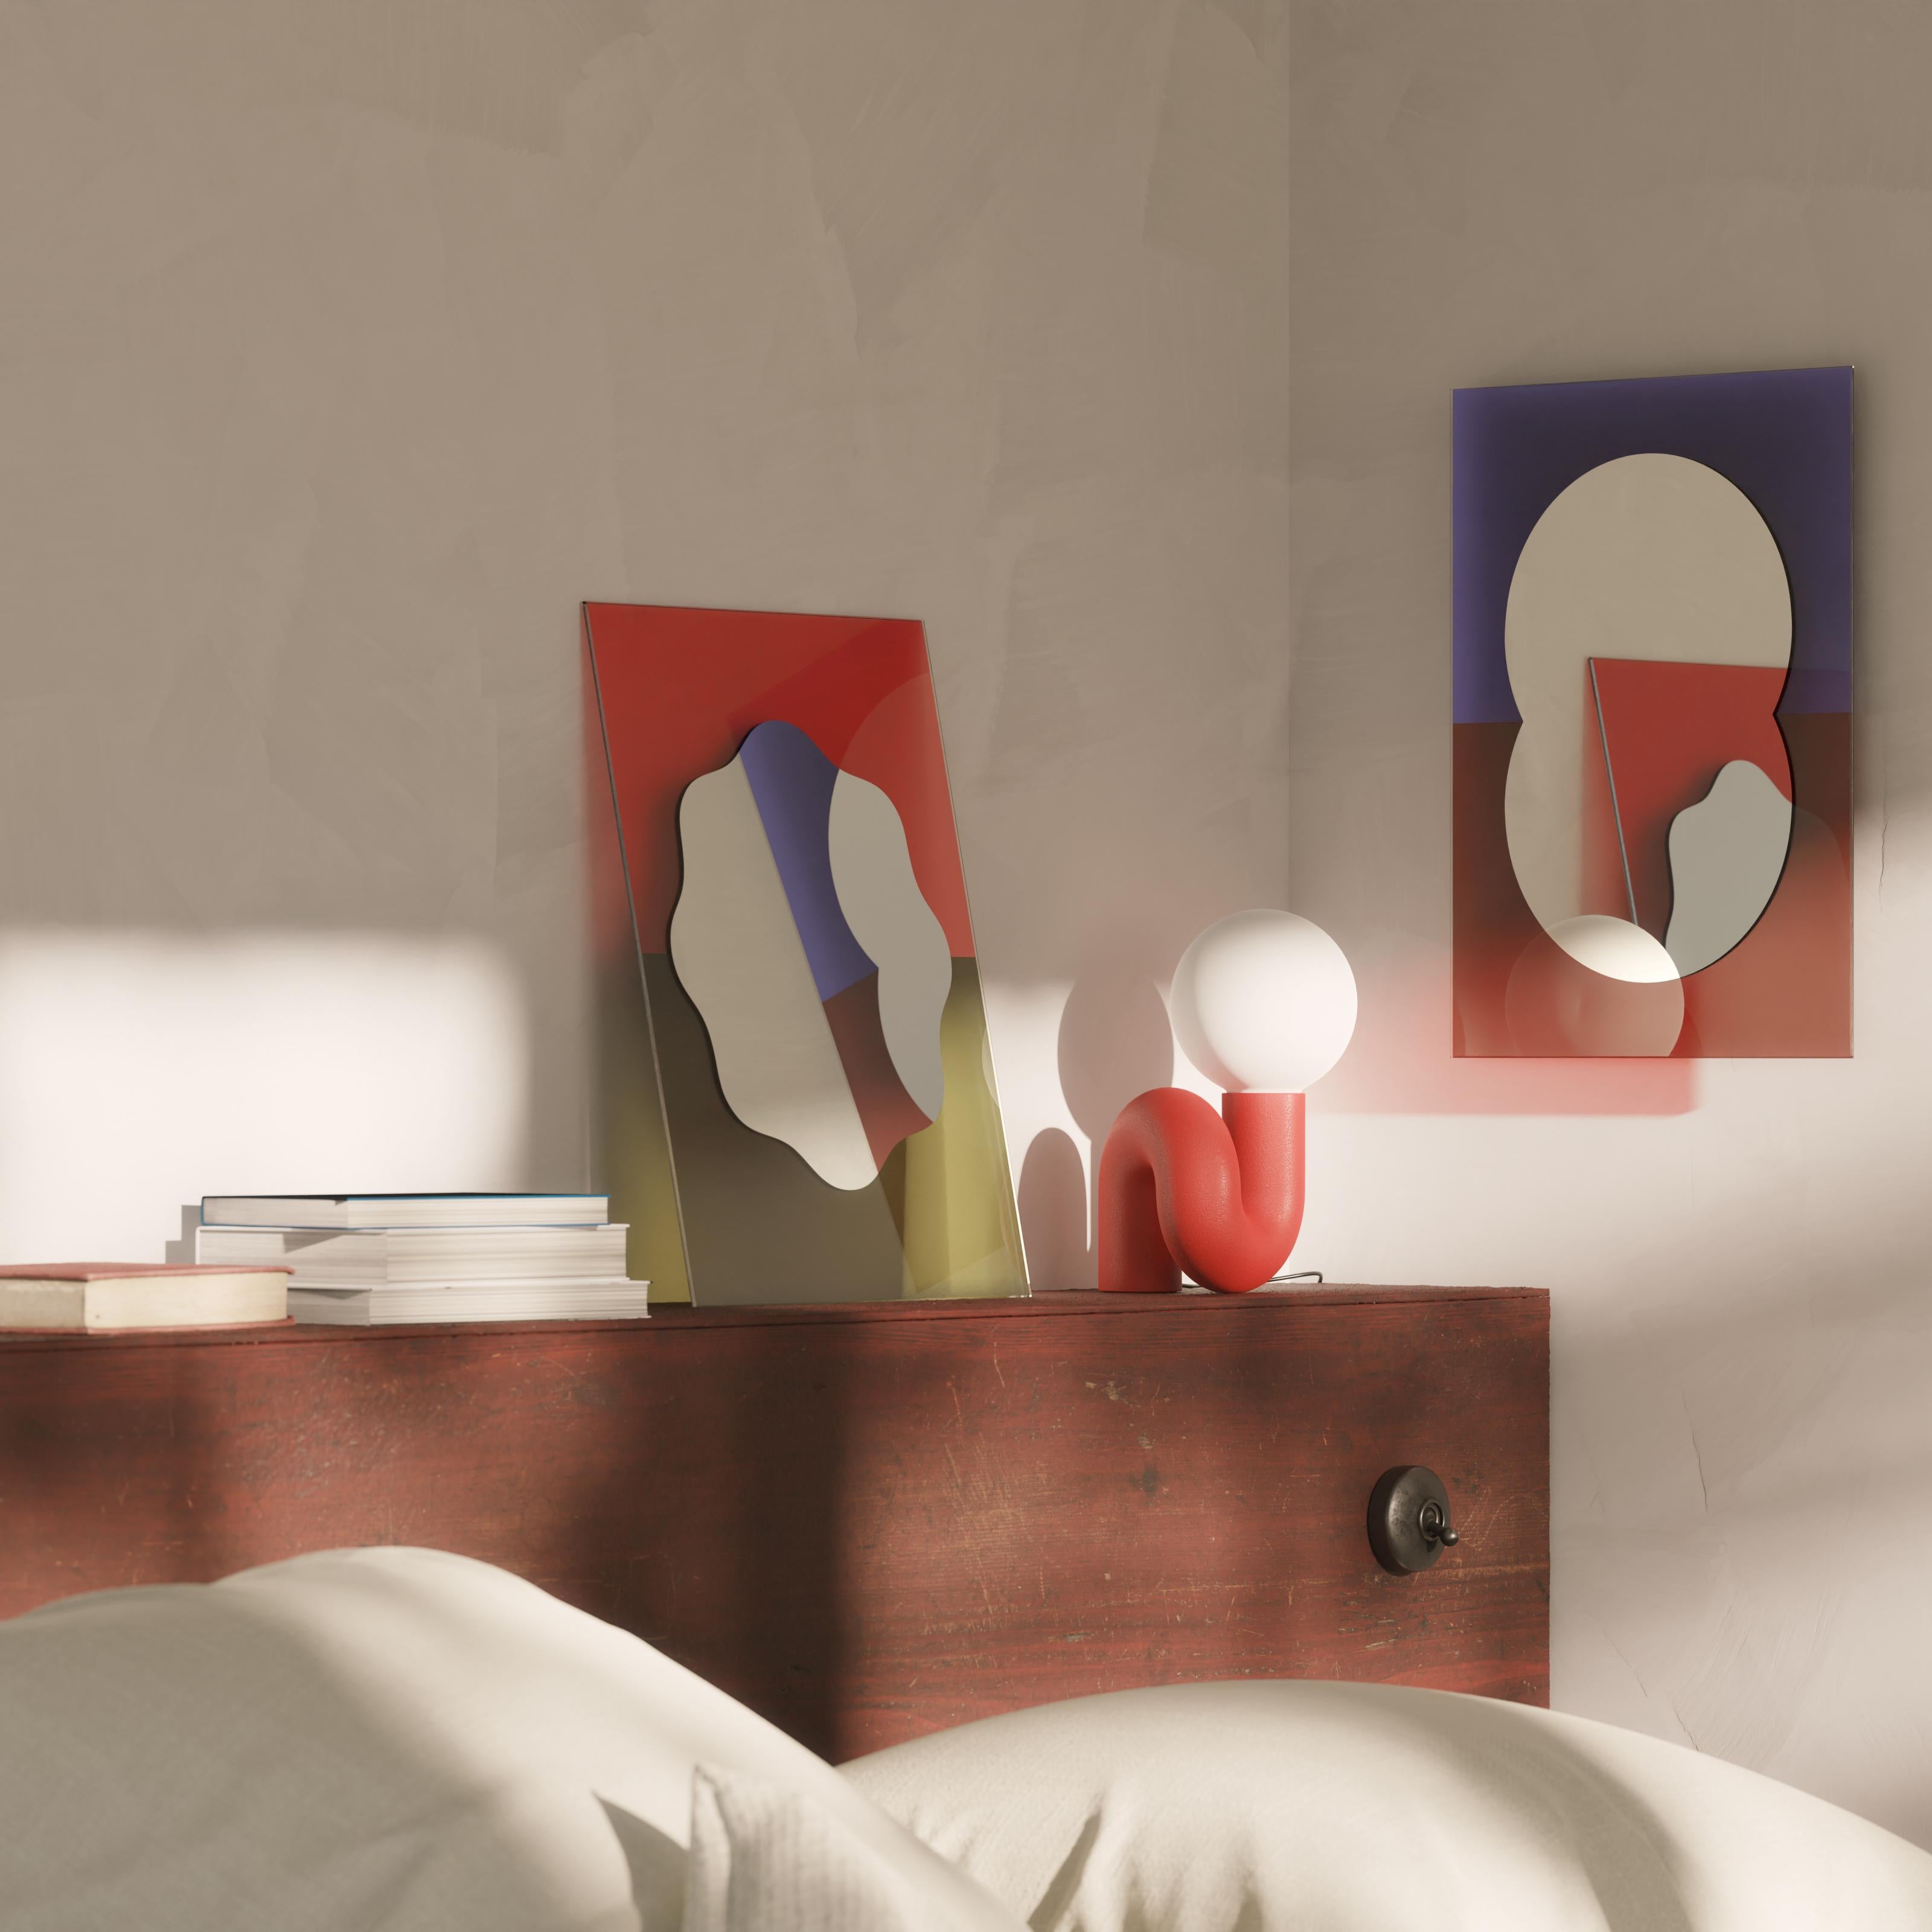 The Small Wander Mirror was inspired by the arts of painting and collage by playfully using shapes and colors to create a bright and dynamic look. The rounded mirror is backed by a translucent colored glass panel, which will cast a subtle halo on